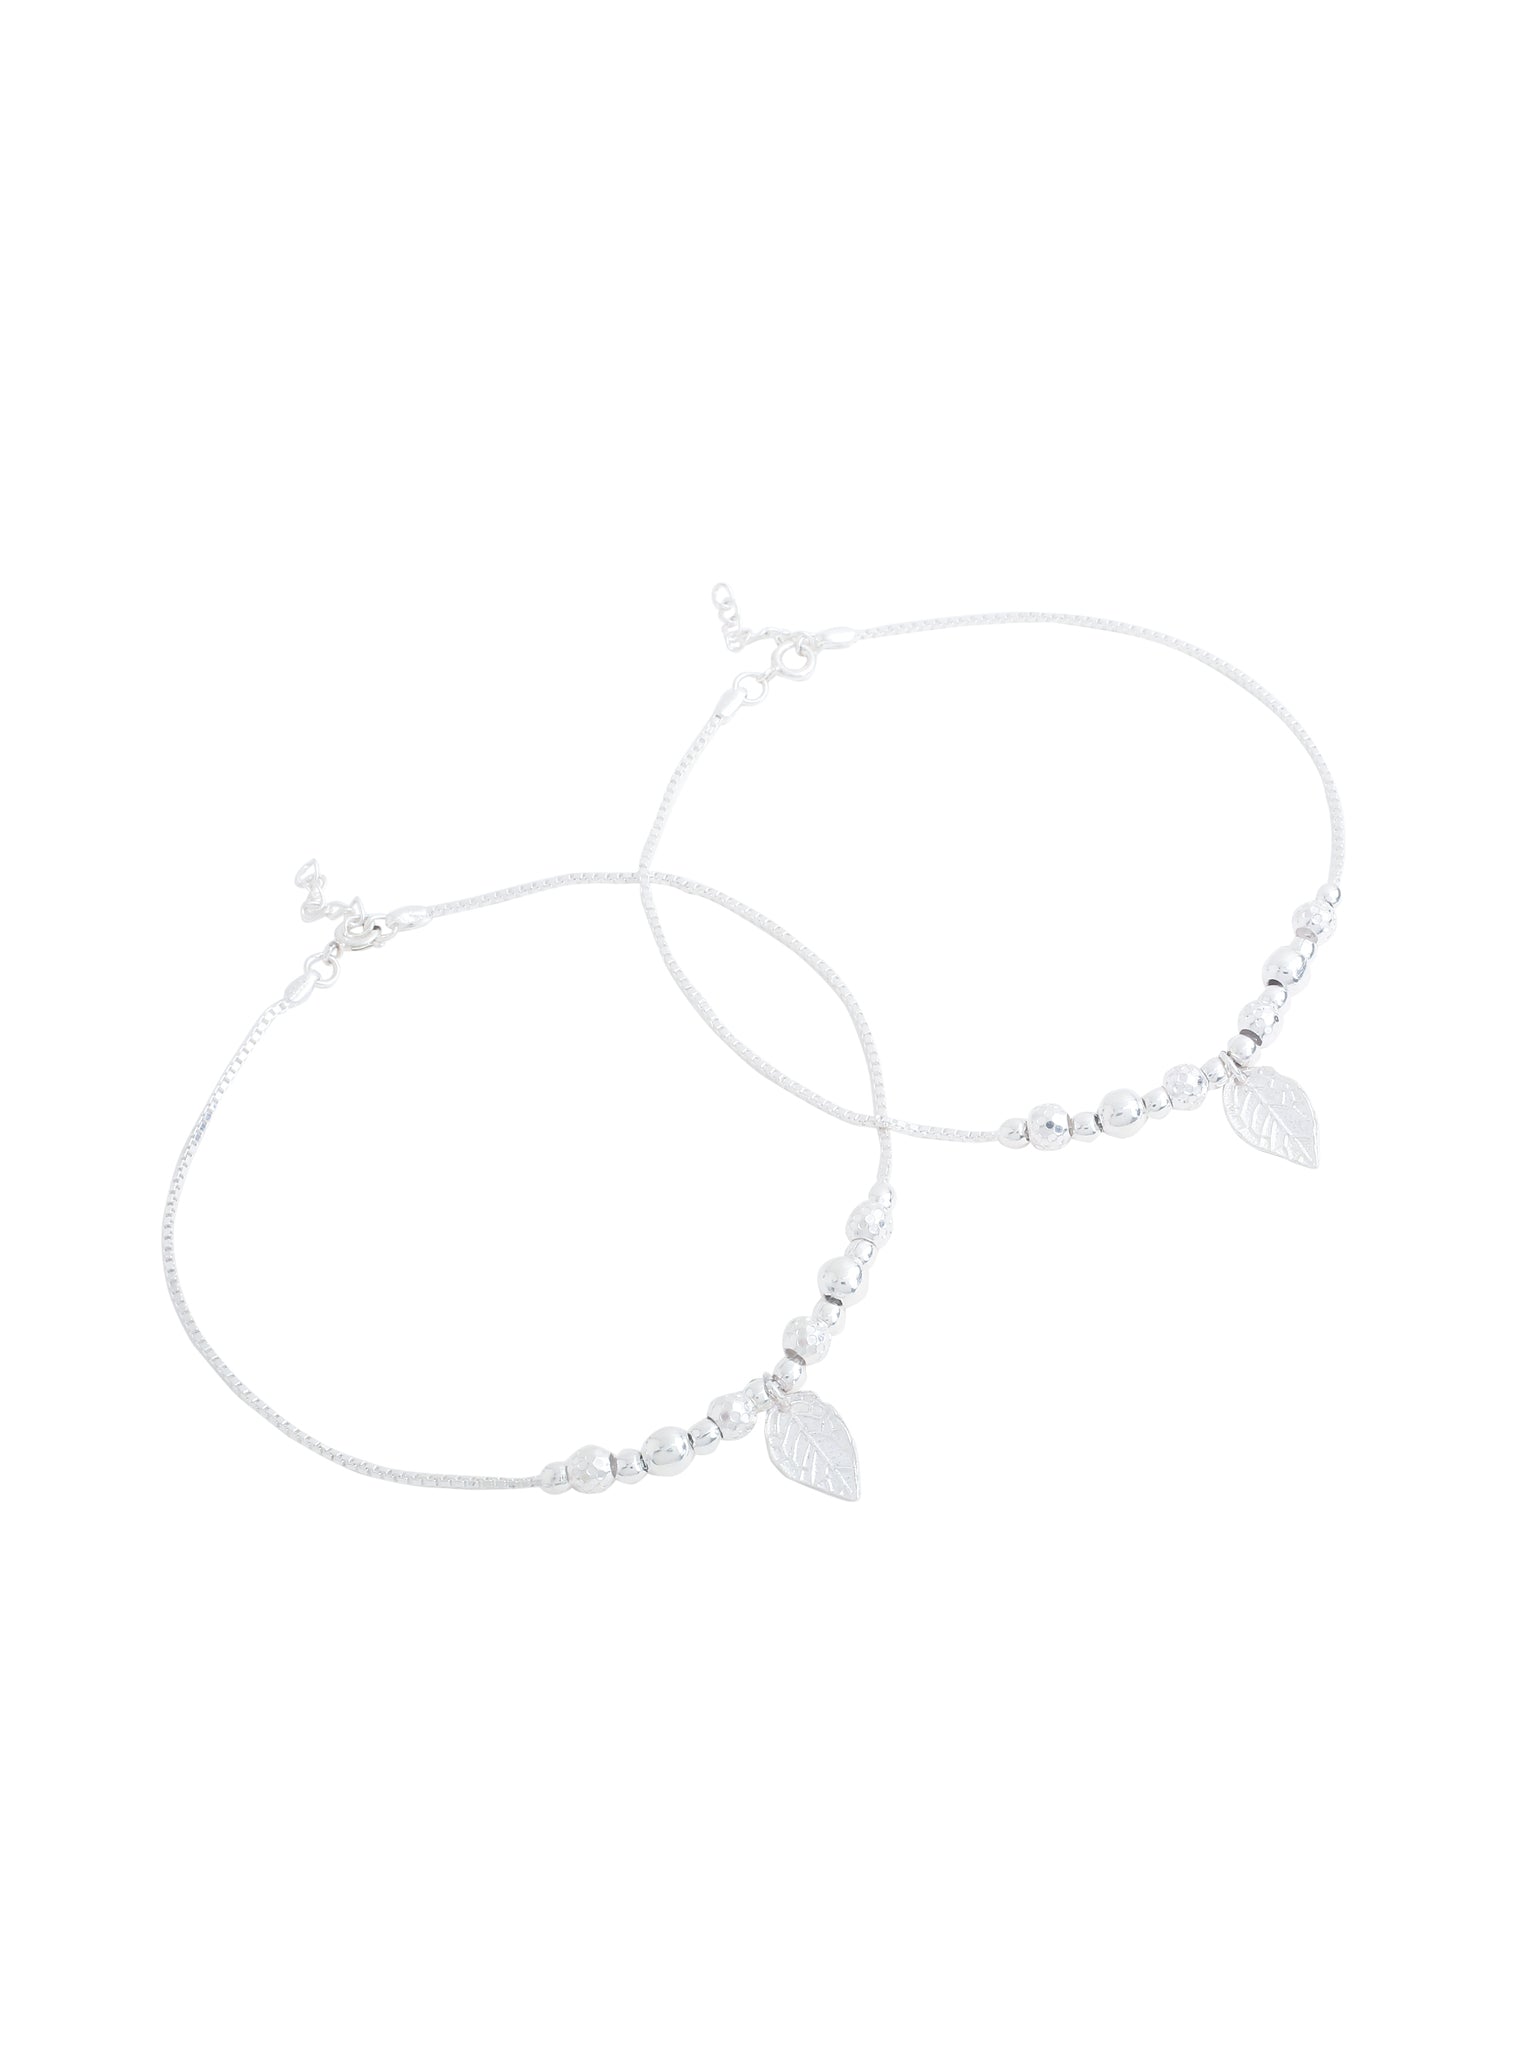 Nature's Elegance: Leaf Charm and Metal Ball Silver Anklet